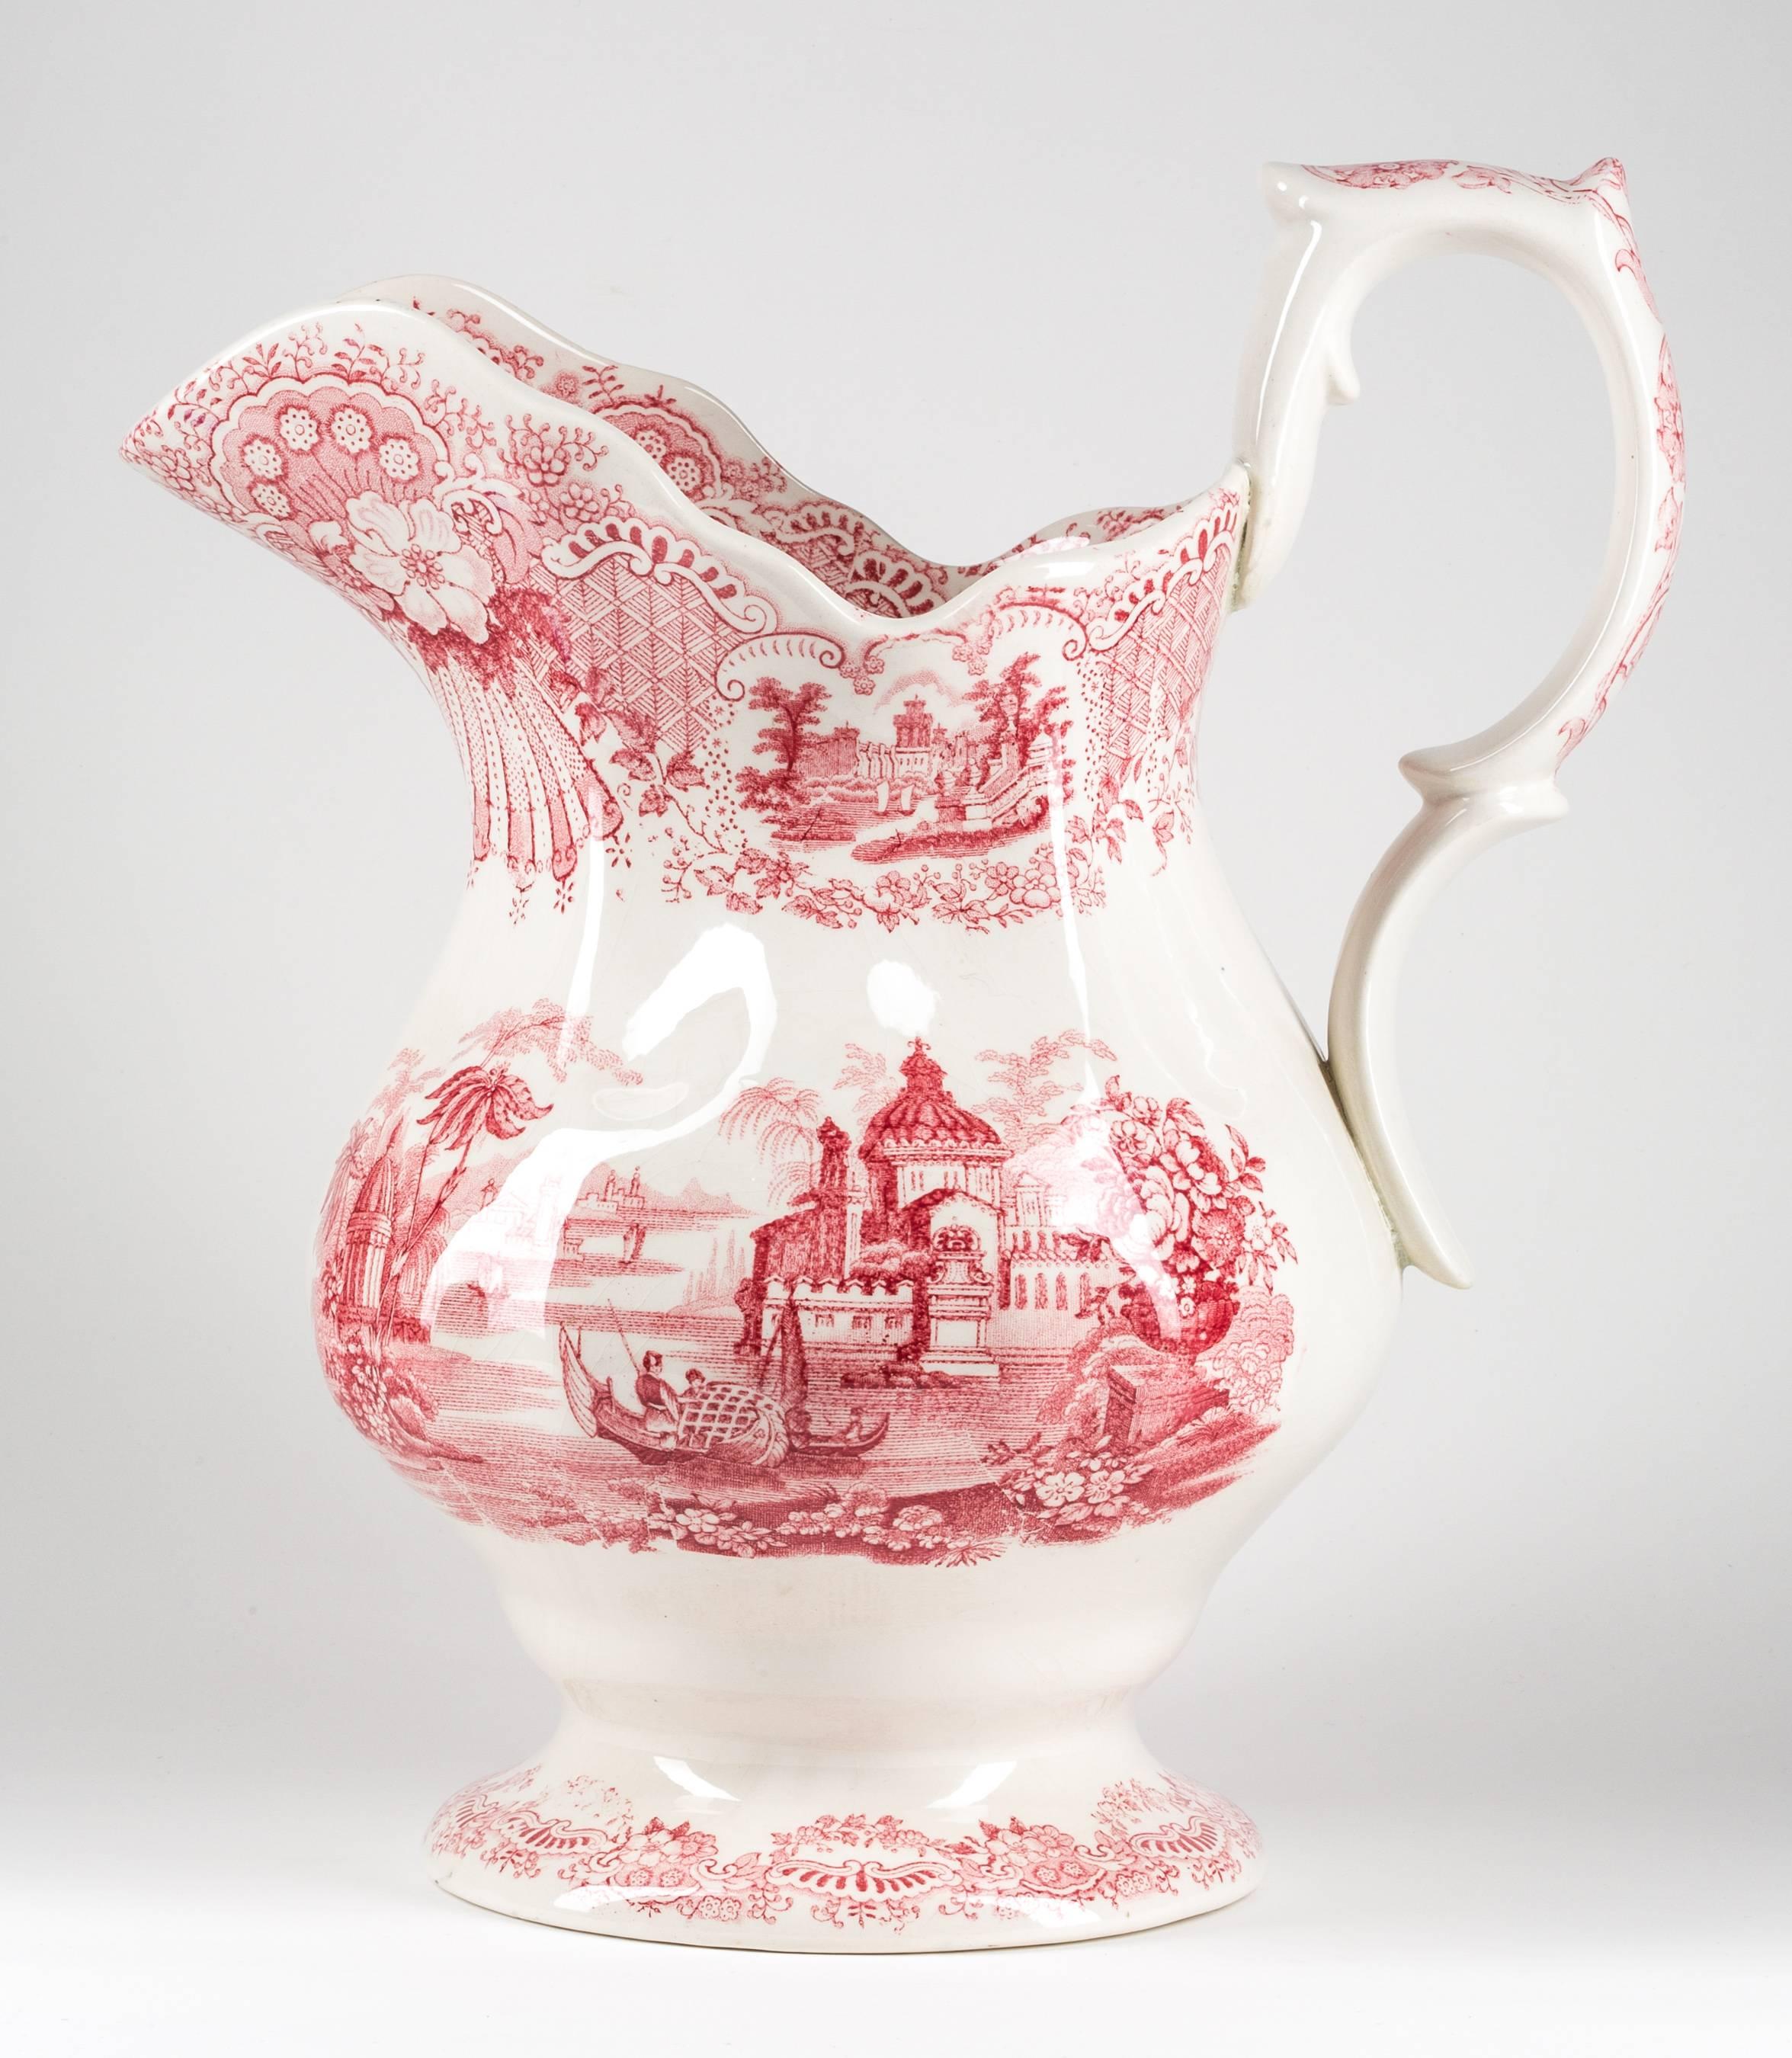 This matched set of porcelain transferware pitcher and basin are decorated in 